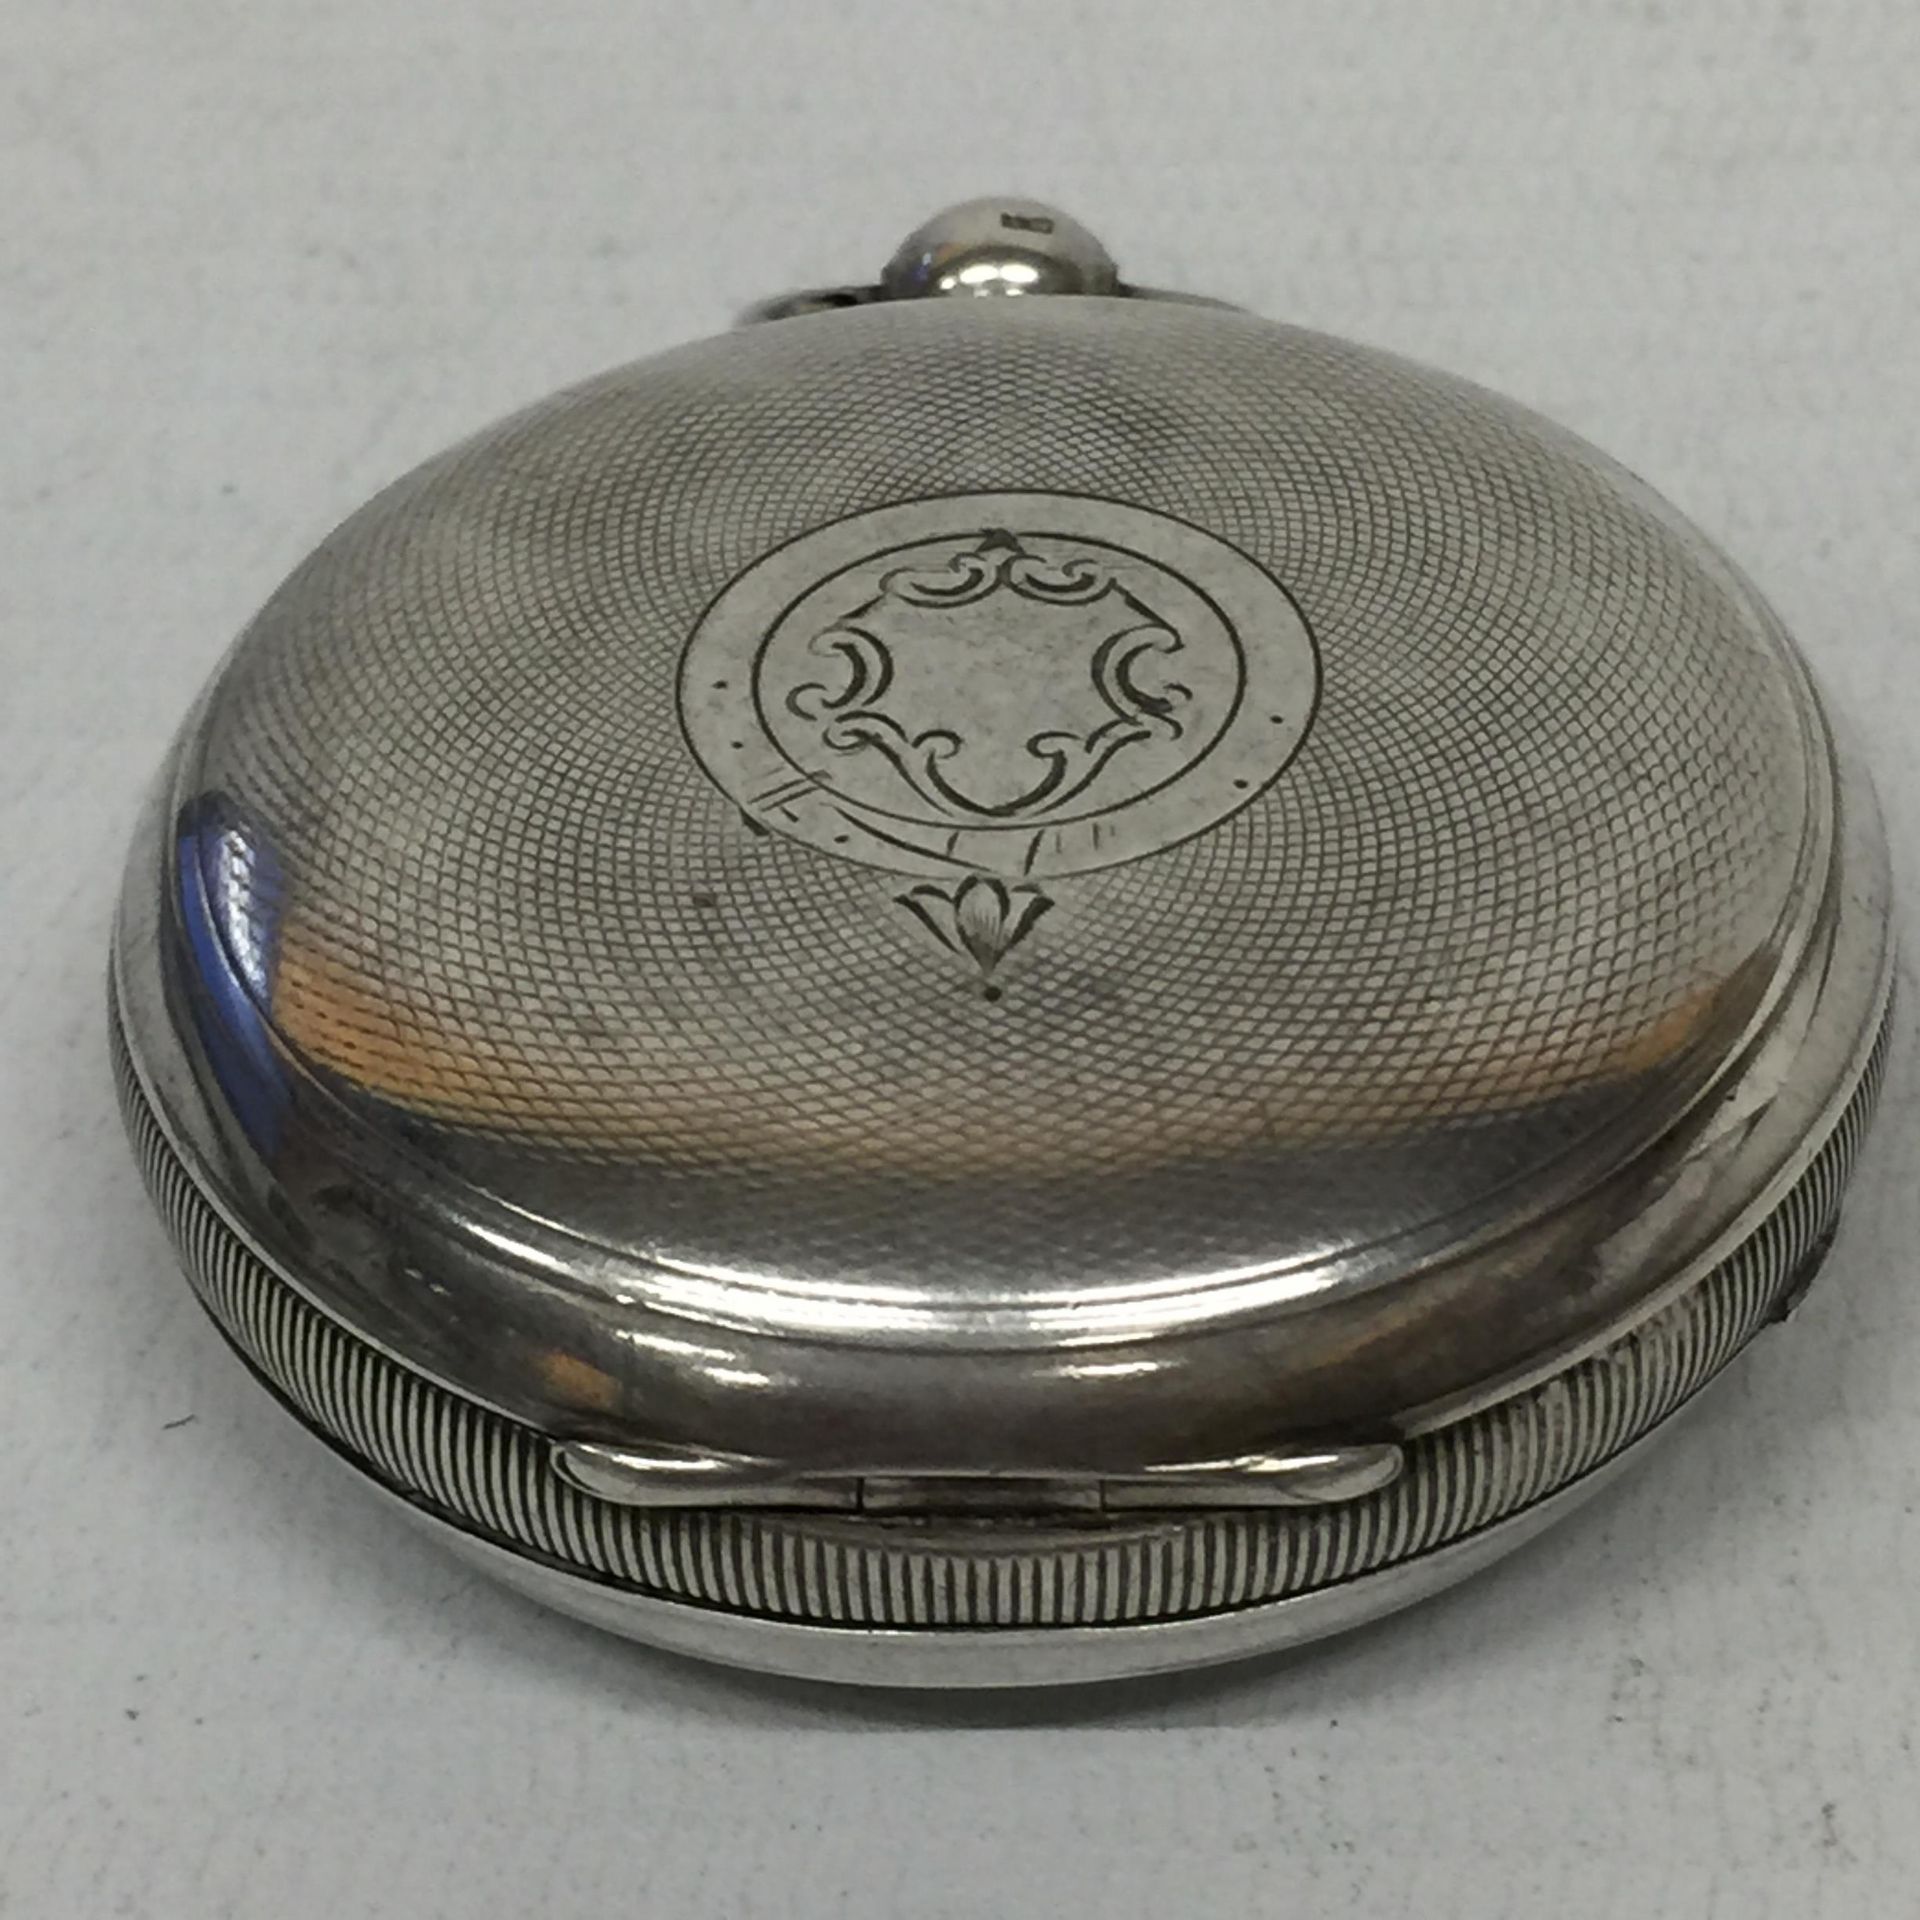 A VICTORIAN J G GRAVES HALLMARKED SILVER FUSEE MOVEMENT POCKET WATCH - Image 2 of 3